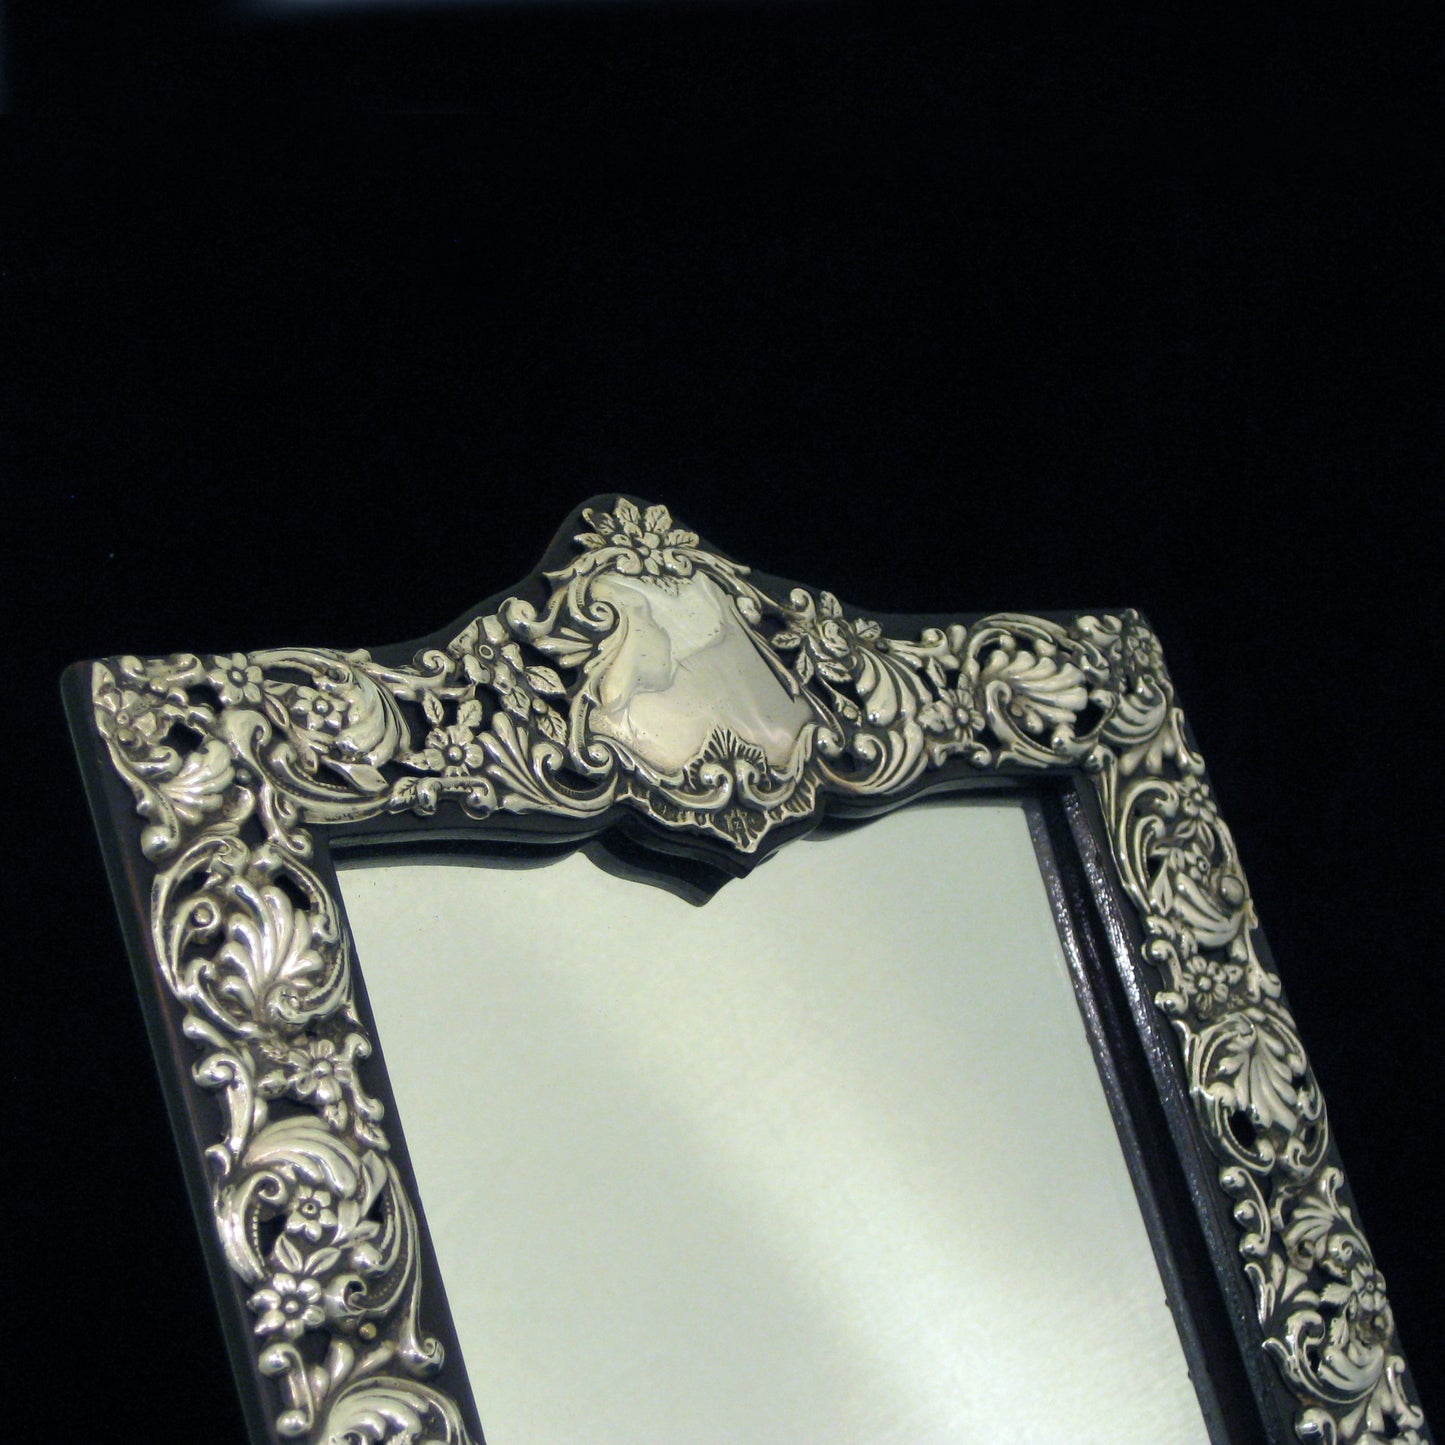 Sterling silver ornate table mirror/picture frame.